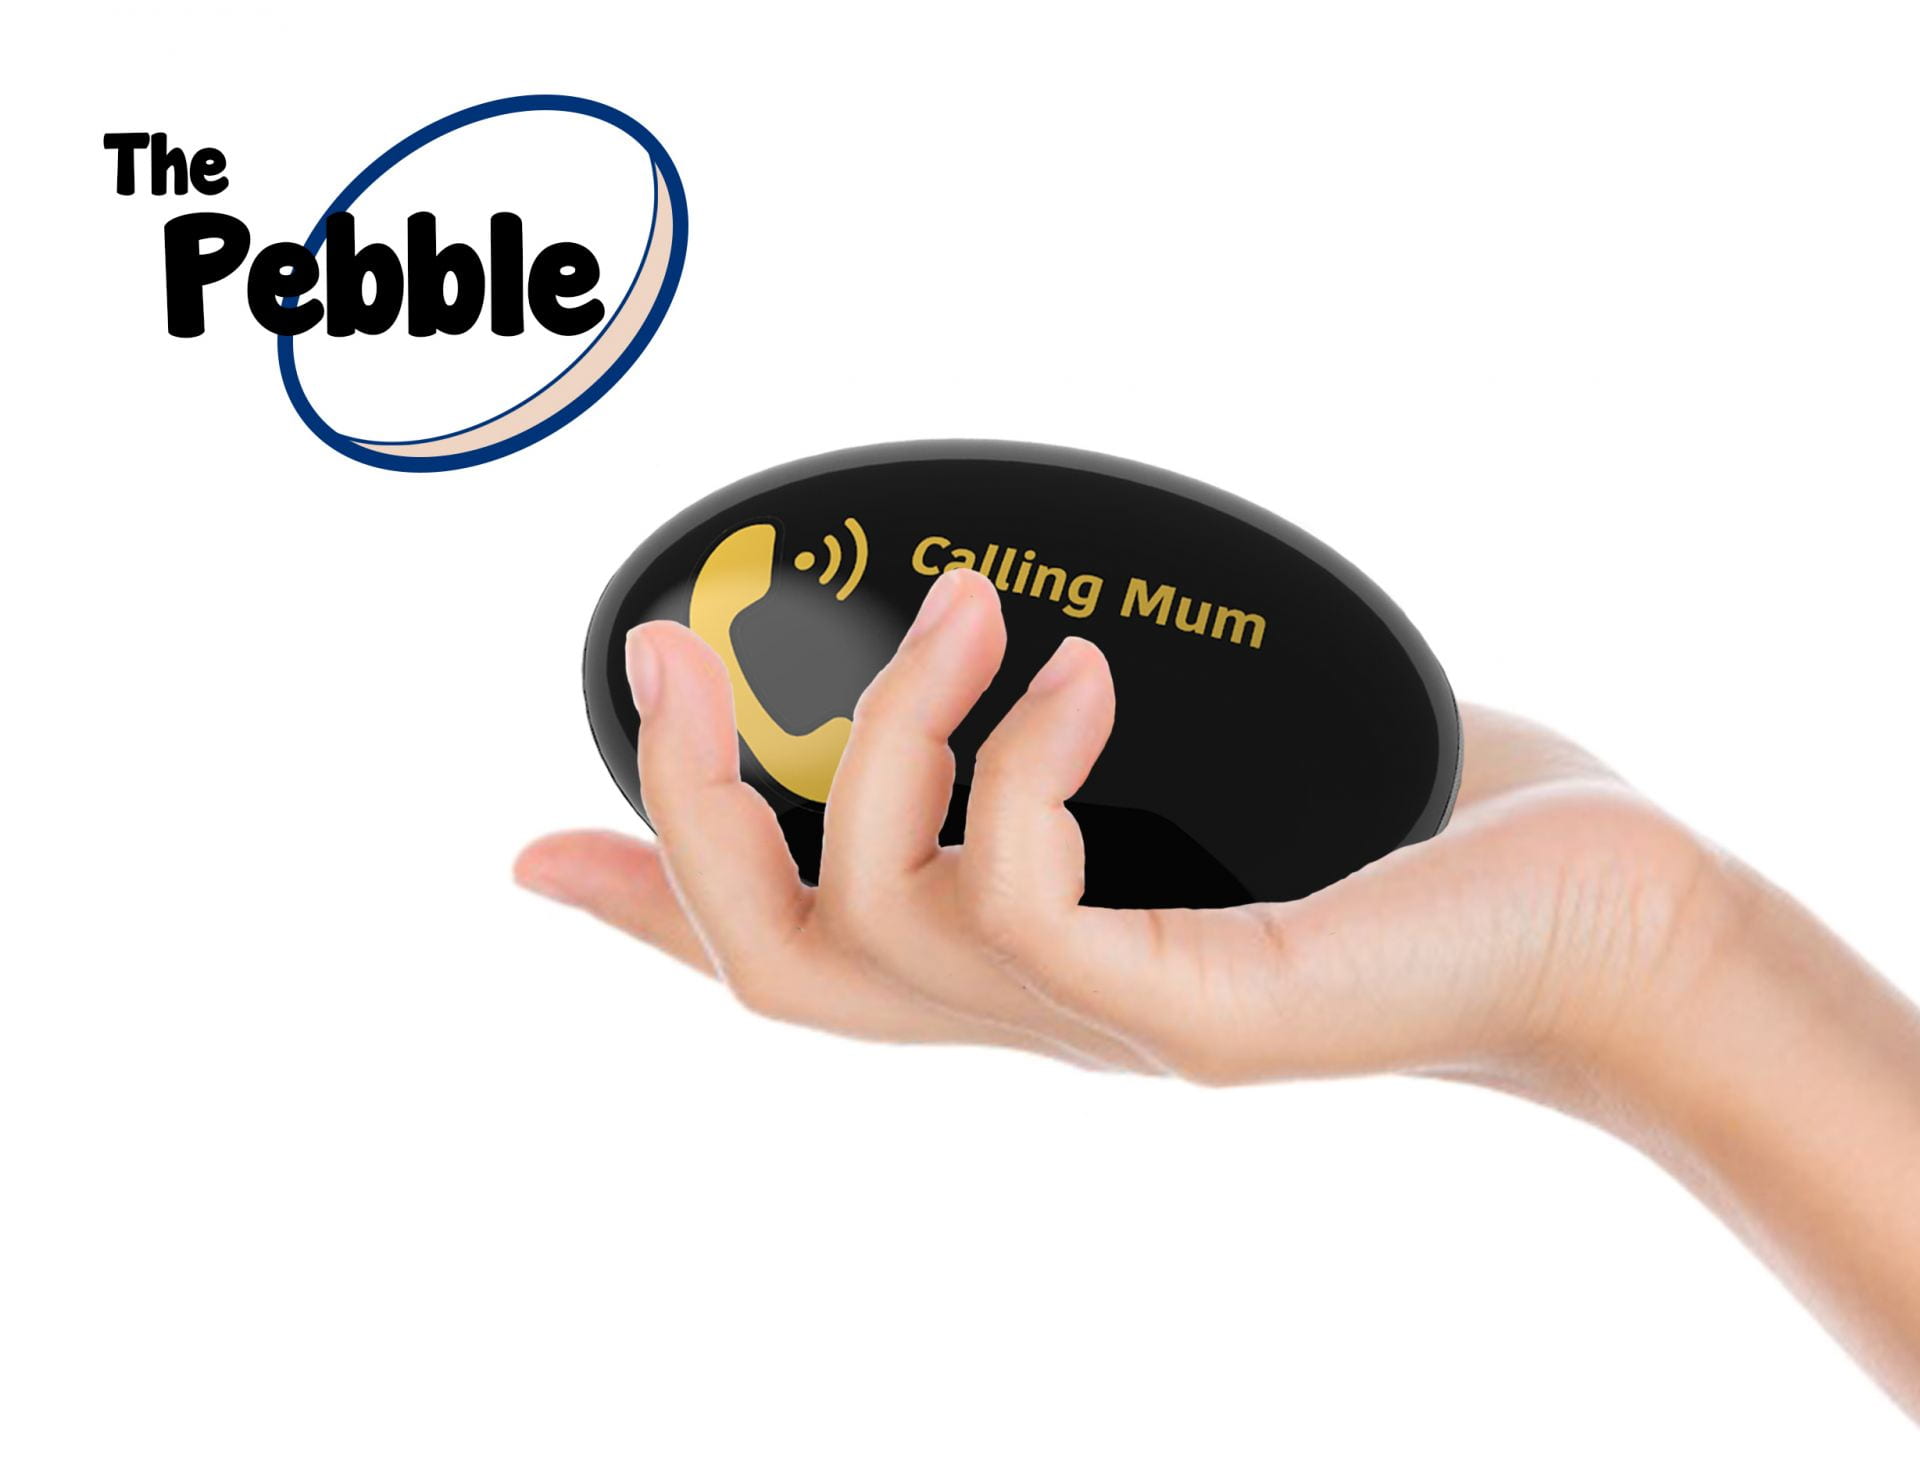 Product design graphical illustration of the Pebble.